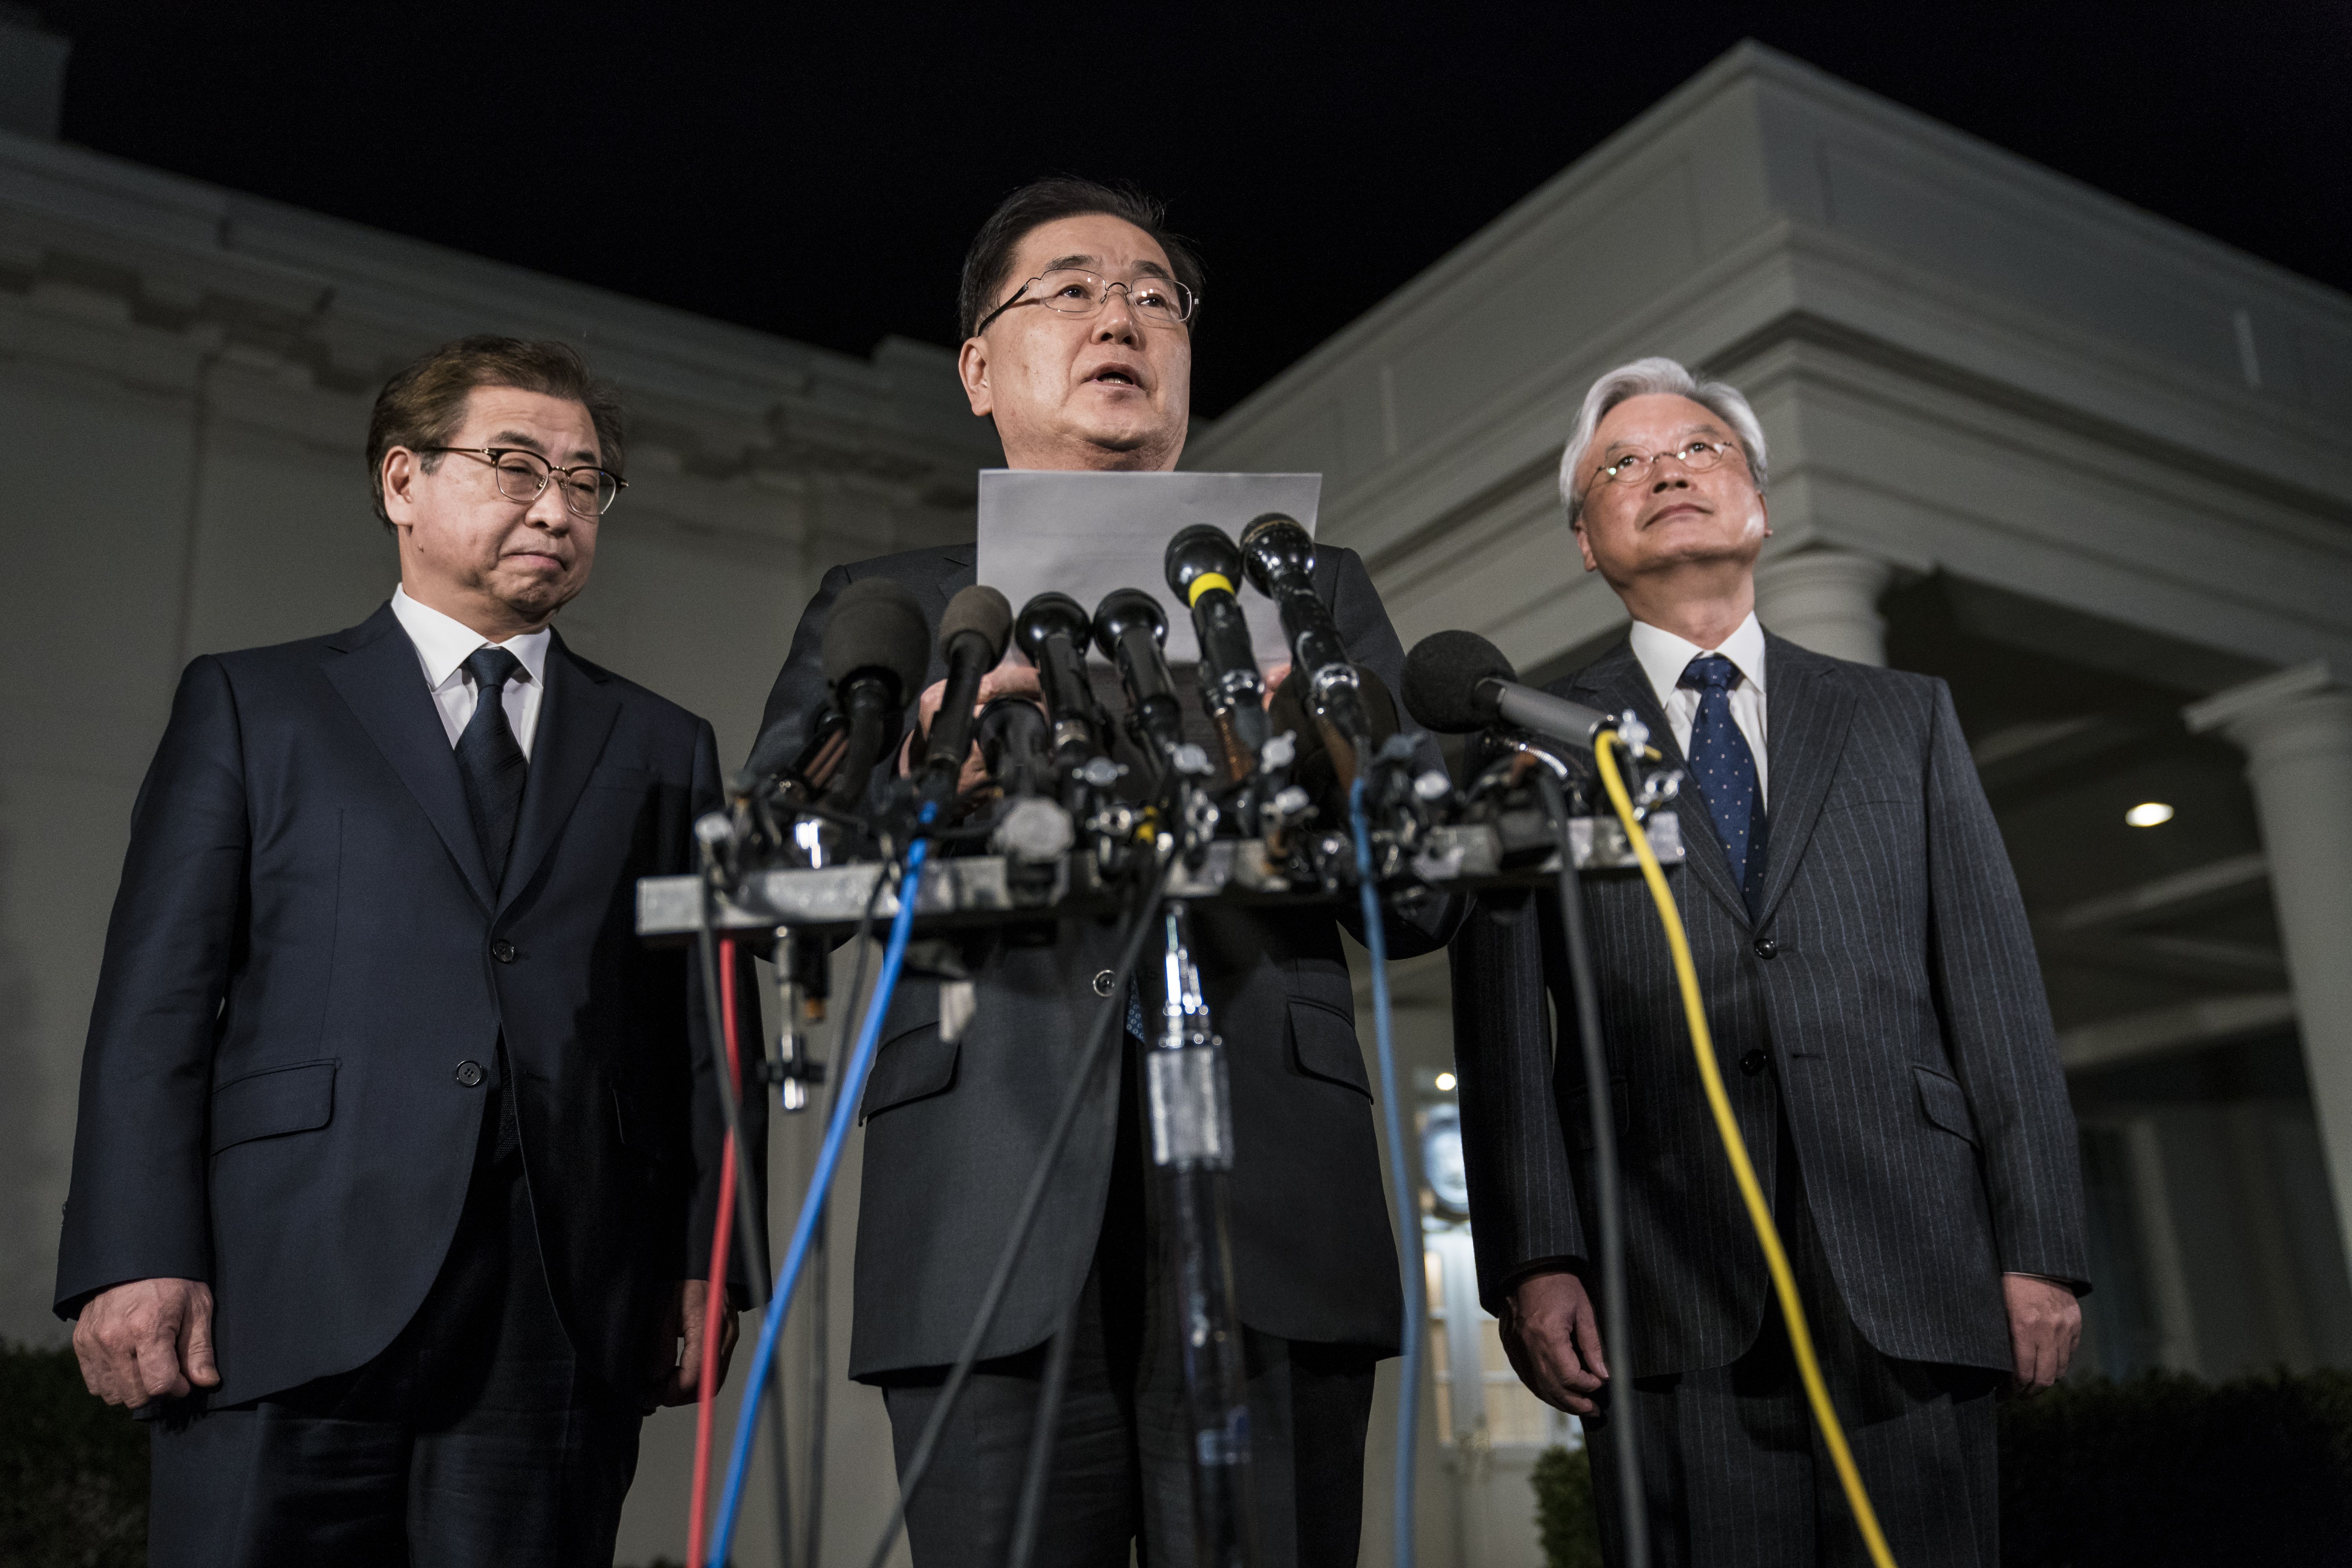 Three South Korean officials stand around microphones in the dark outside the White House.